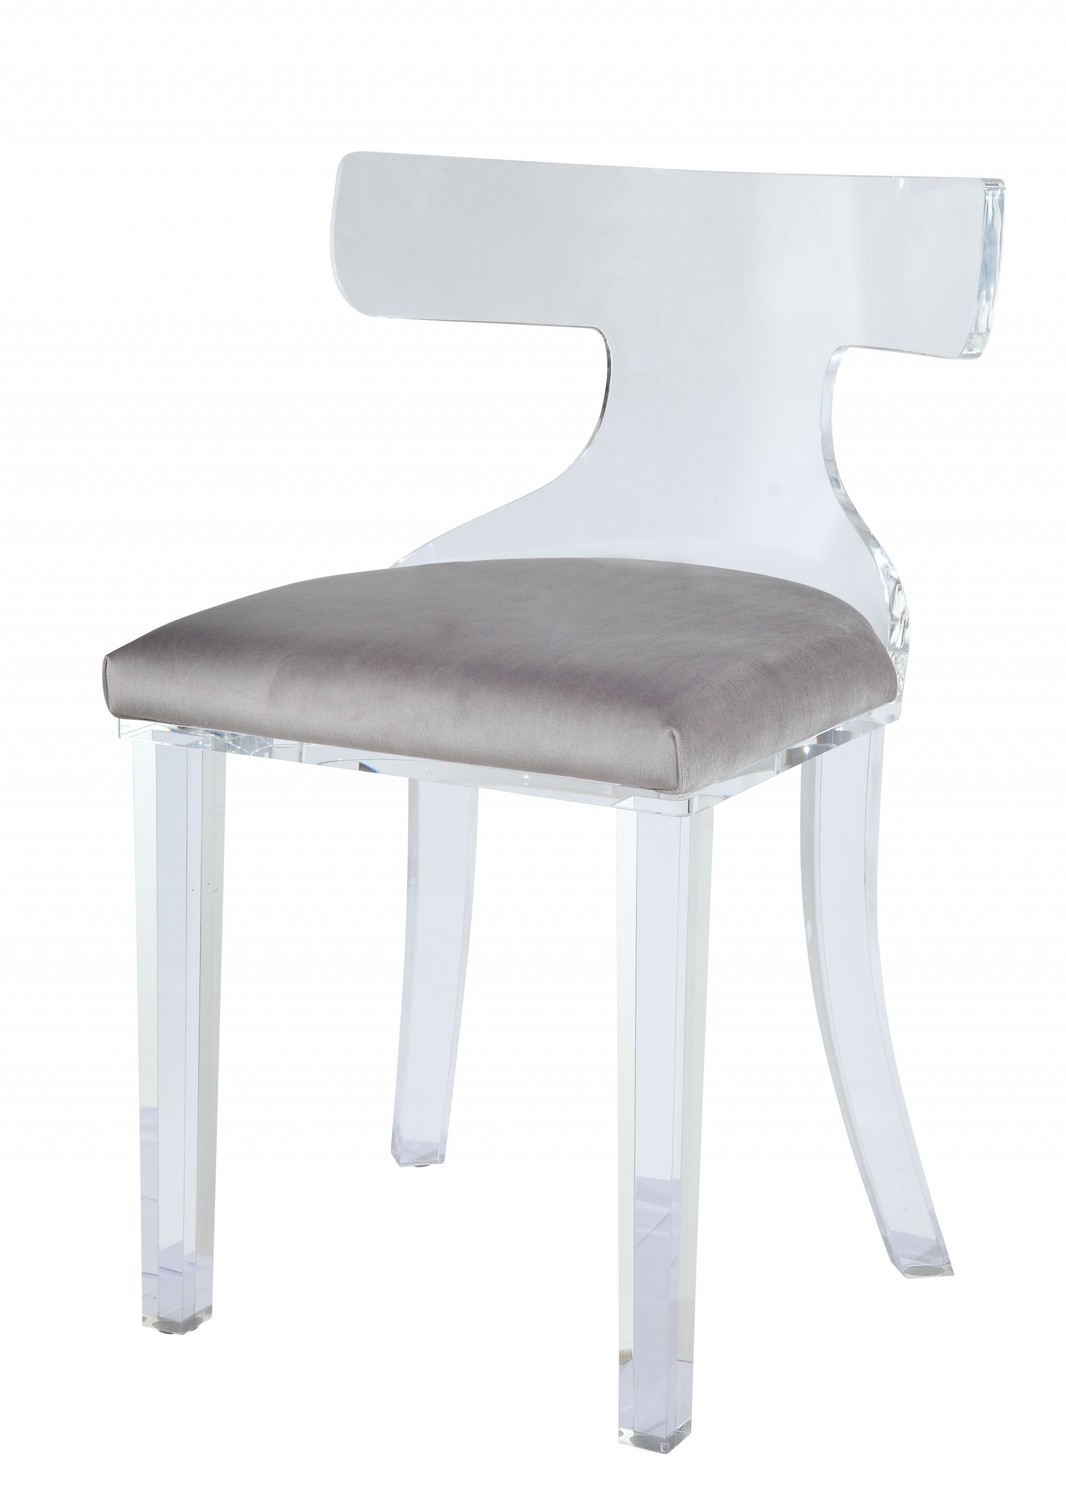 20" X 18" X 31" Gray Velvet And Clear Acrylic Accent Chair